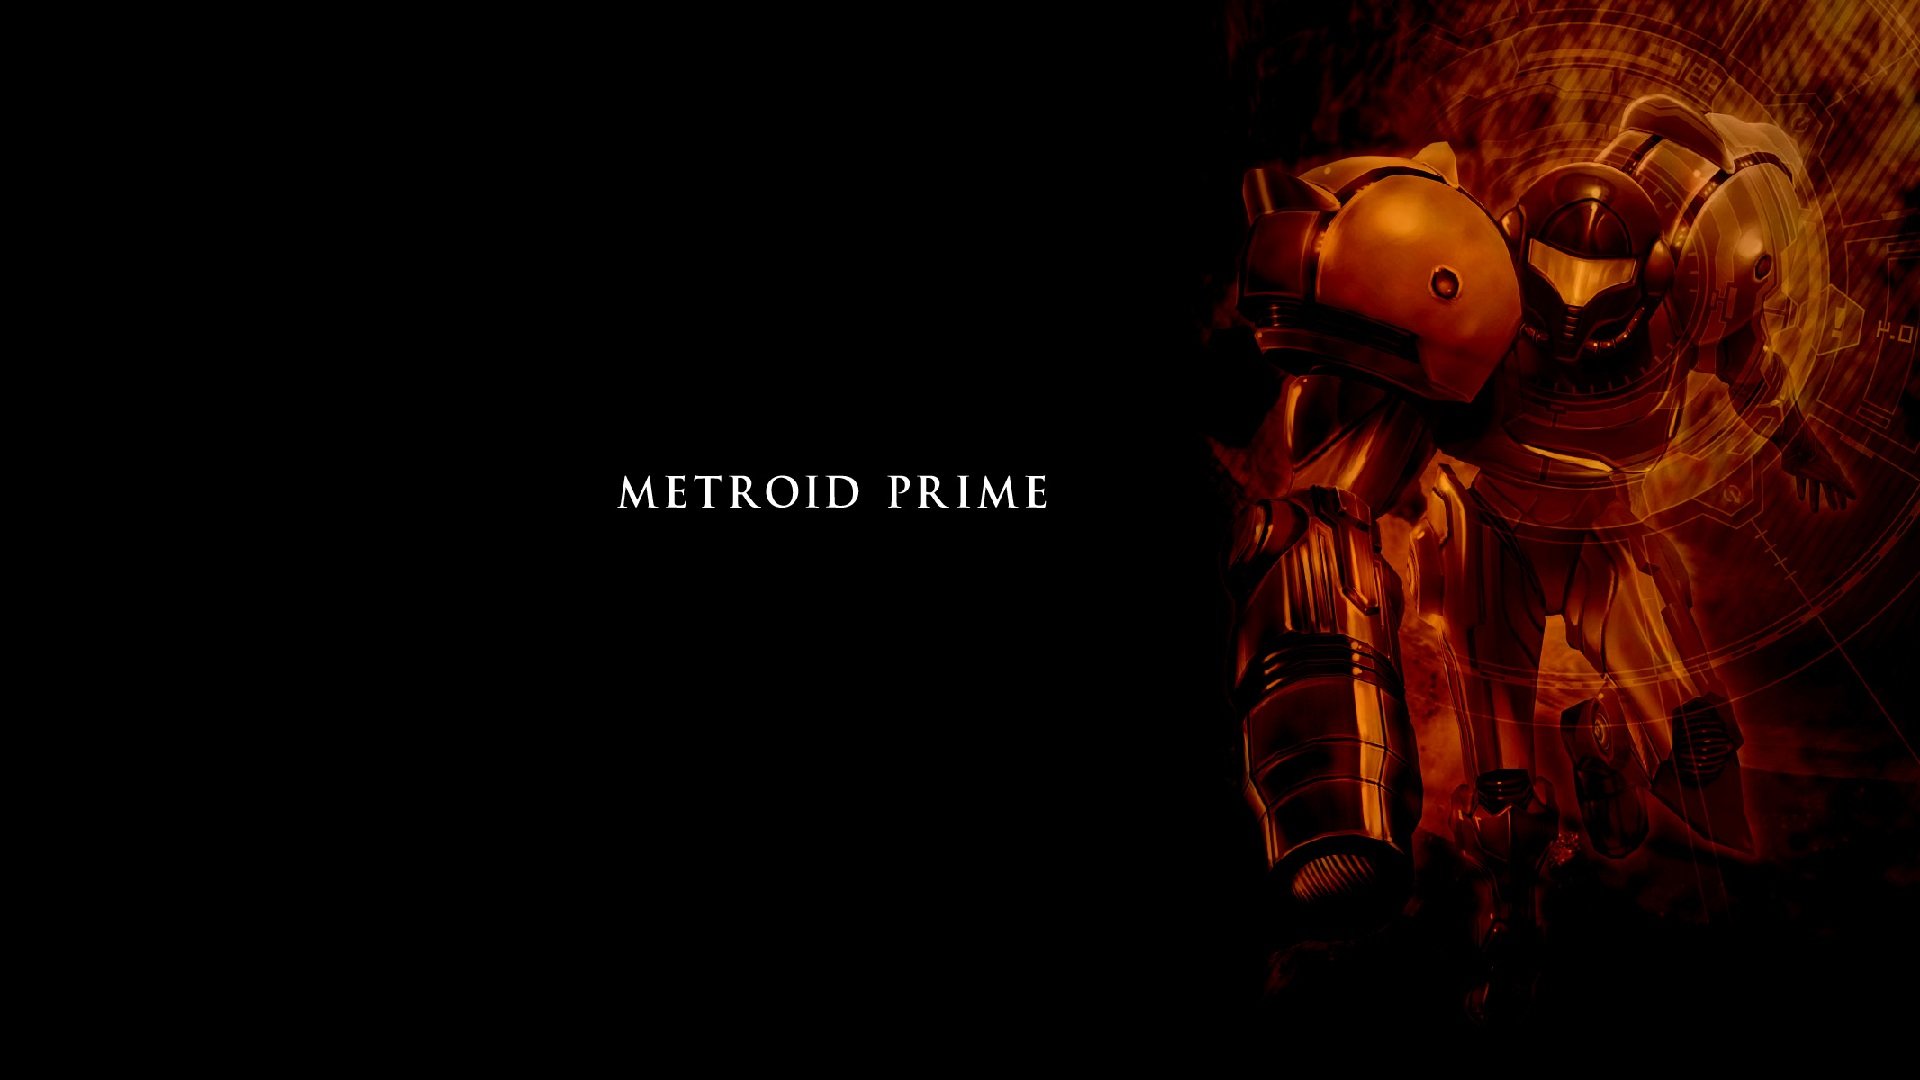 Download hd 1920x1080 Metroid Prime computer wallpaper ID:300382 for free